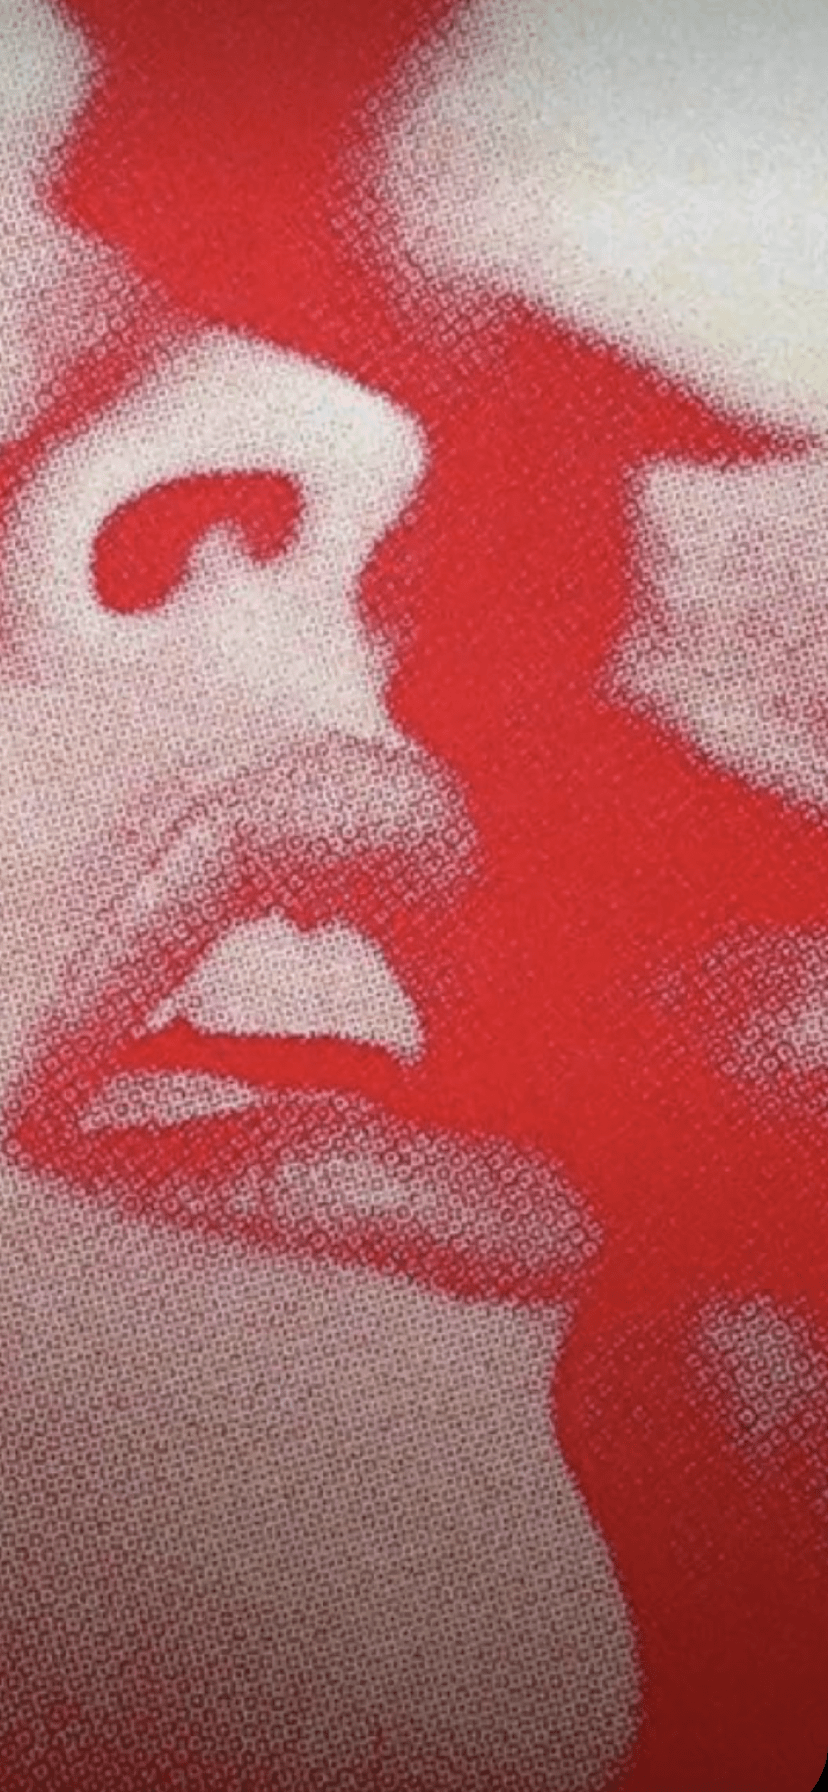 A red and white abstract painting of a woman's face. - Lips